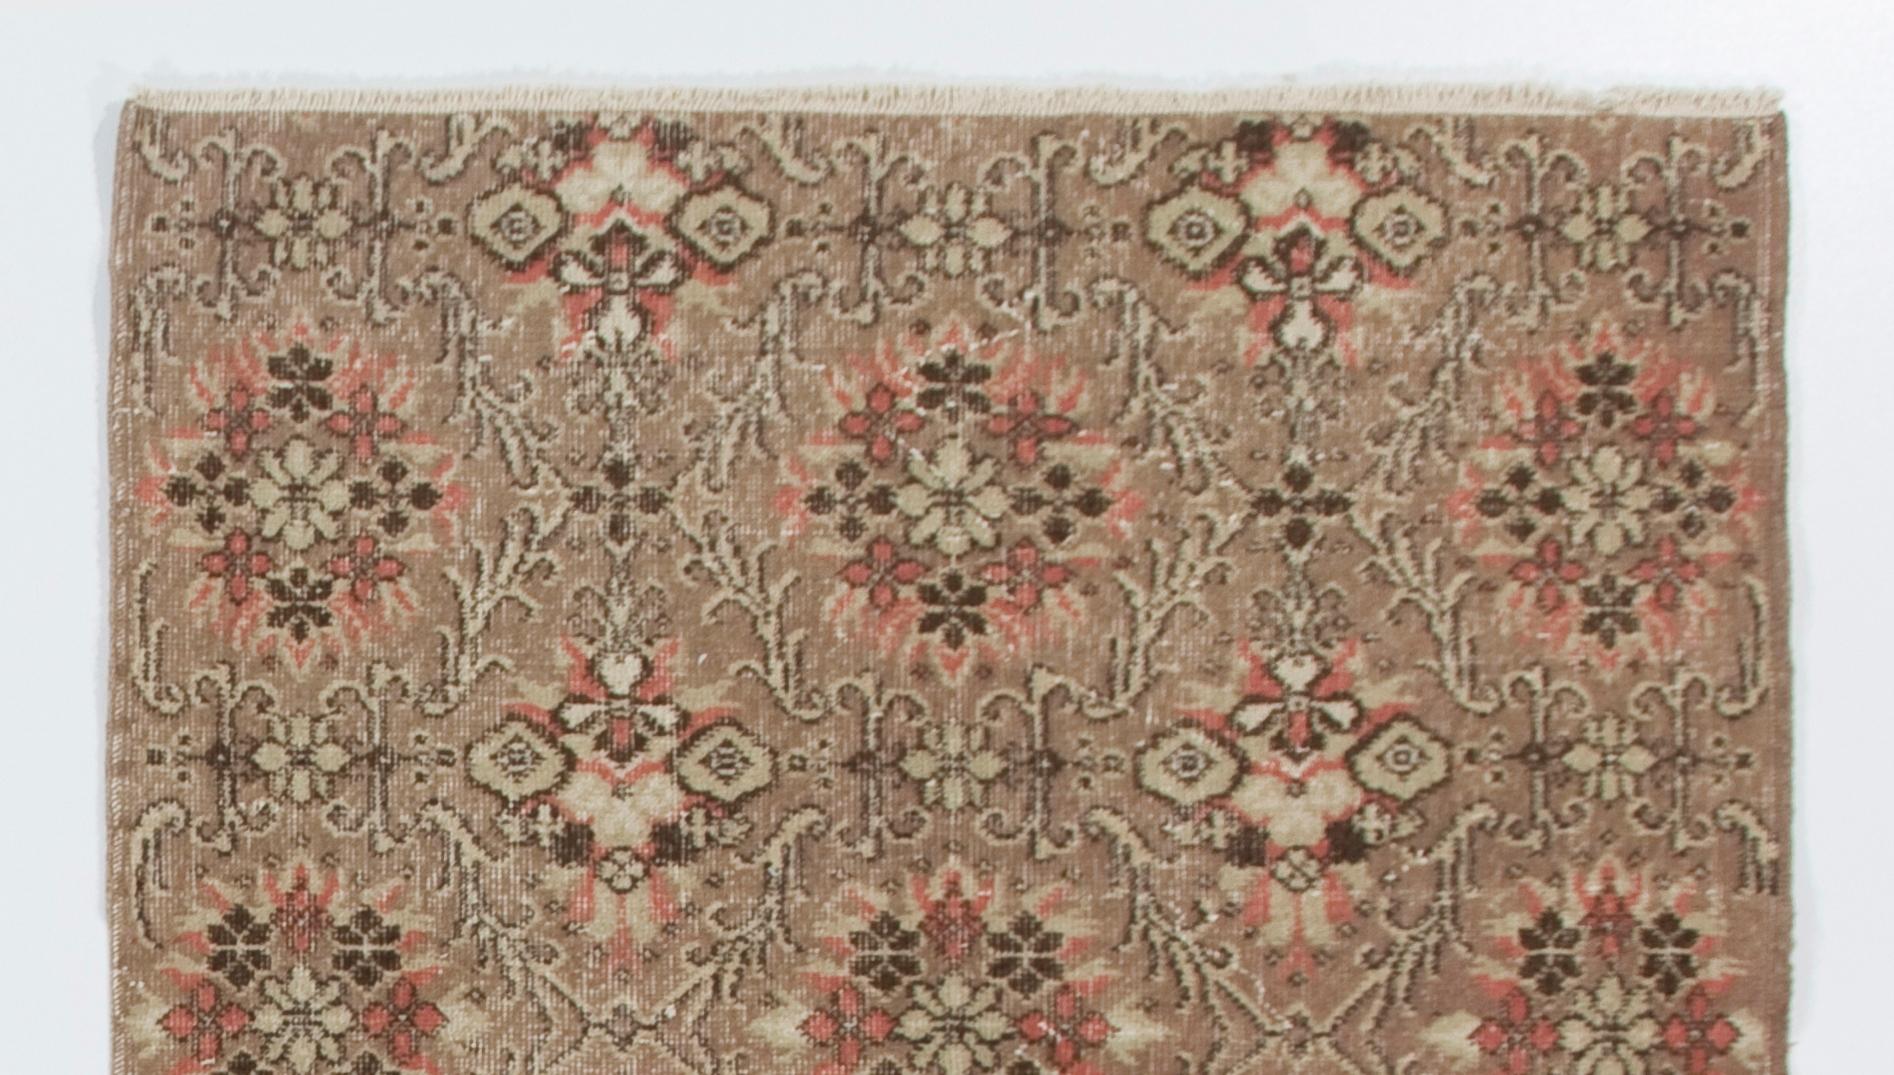 This vintage hand knotted Turkish rug was originally made in the 1960s. It features an all-over latticed floral design in coral pink and taupe. It has medium wool pile on cotton foundation, is in good condition, sturdy and clean as a brand new rug.